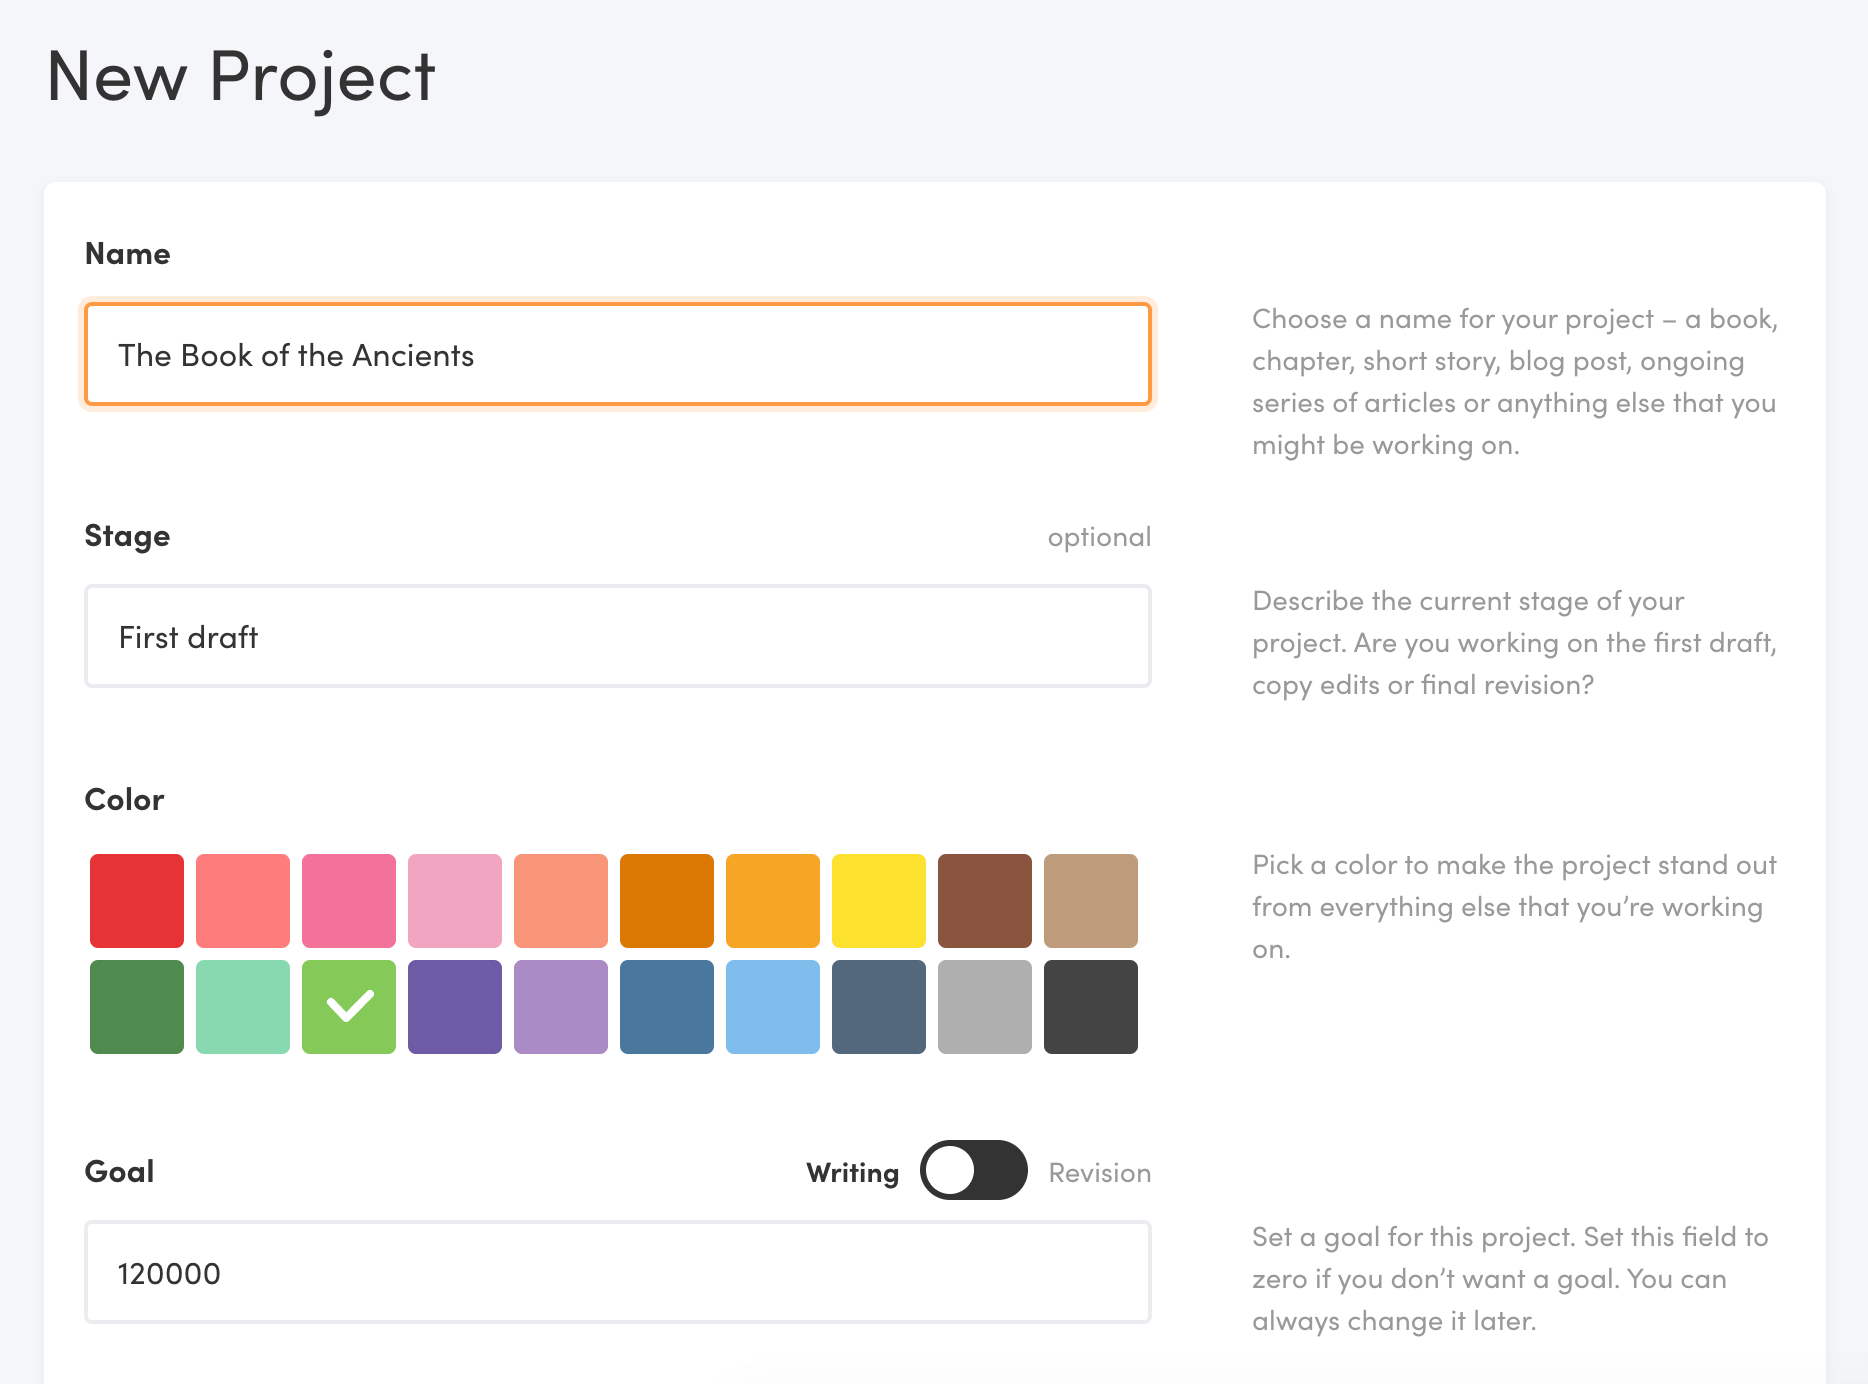 Creating a new project